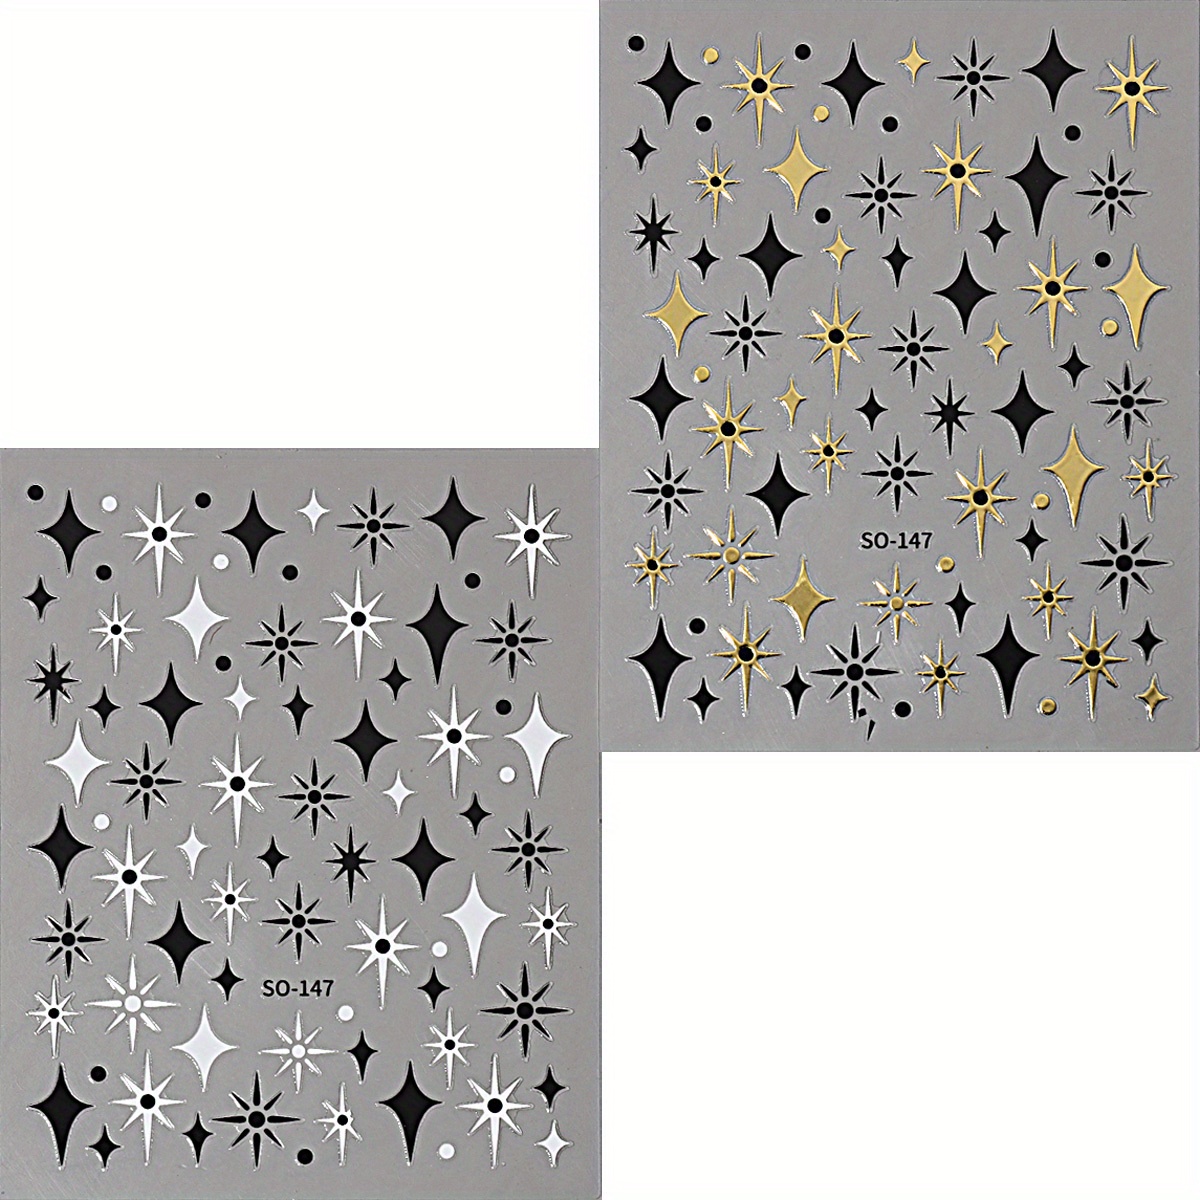 Black stickers with gold. Sticker gold corner on white By Tartila